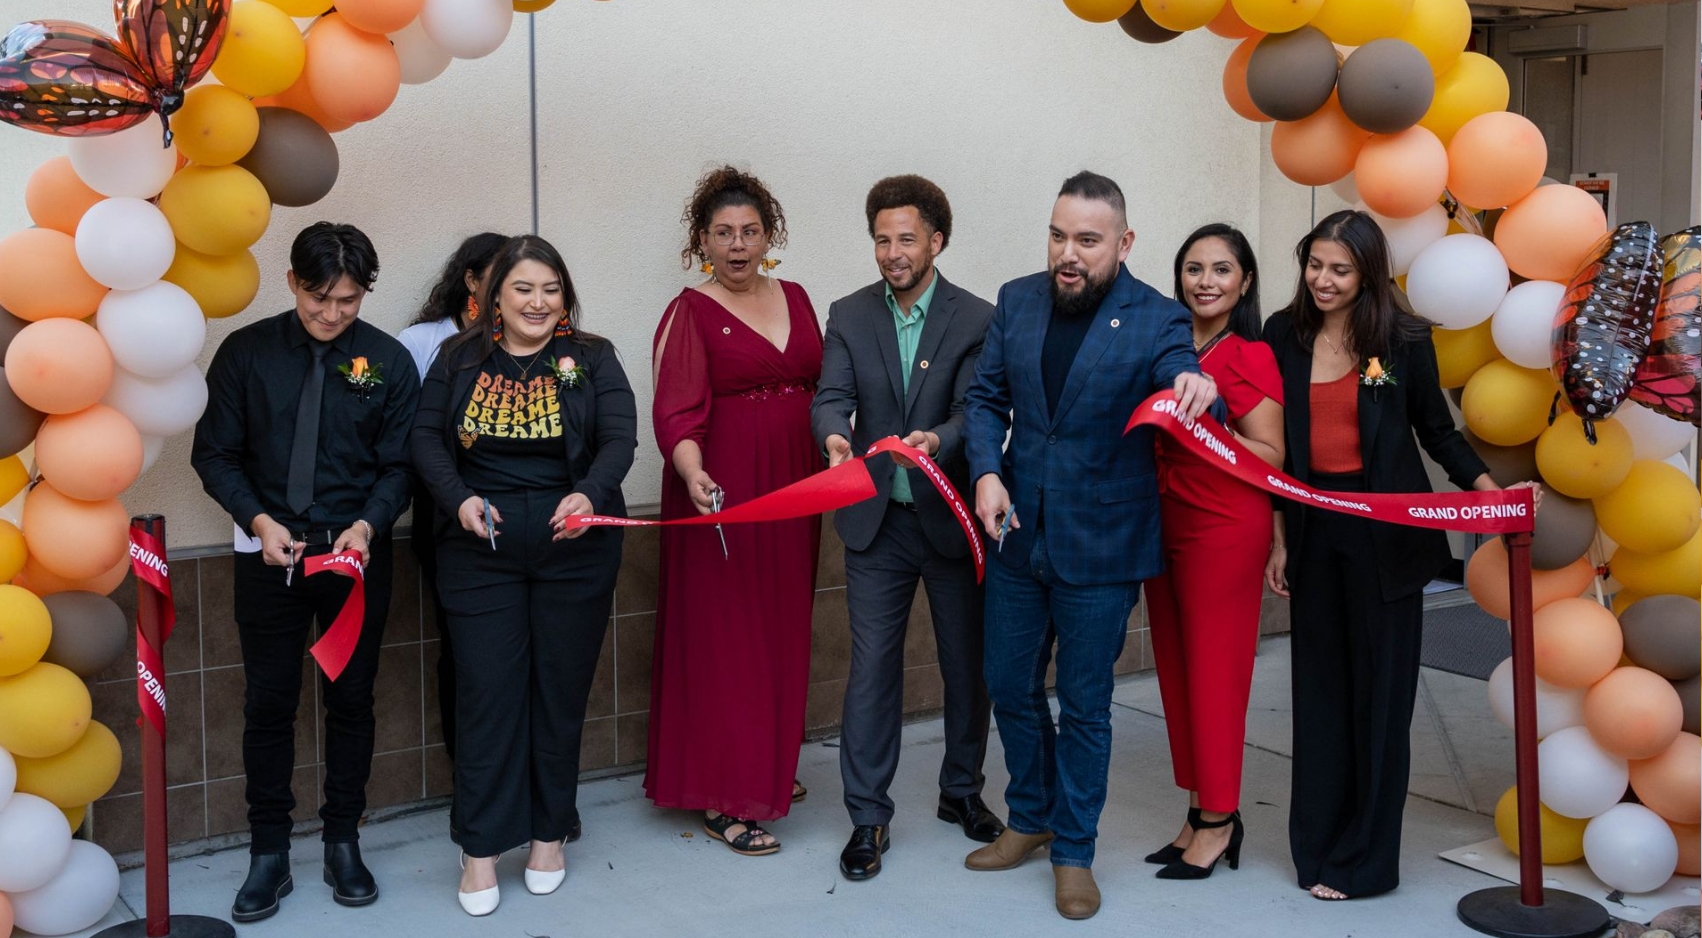 URC Director Cynthia Torres and SDSU VP of Student Affairs and Campus Diversity Luke Wood (center) are joined by supporters for the grand opening celebration of the university's new resource center.